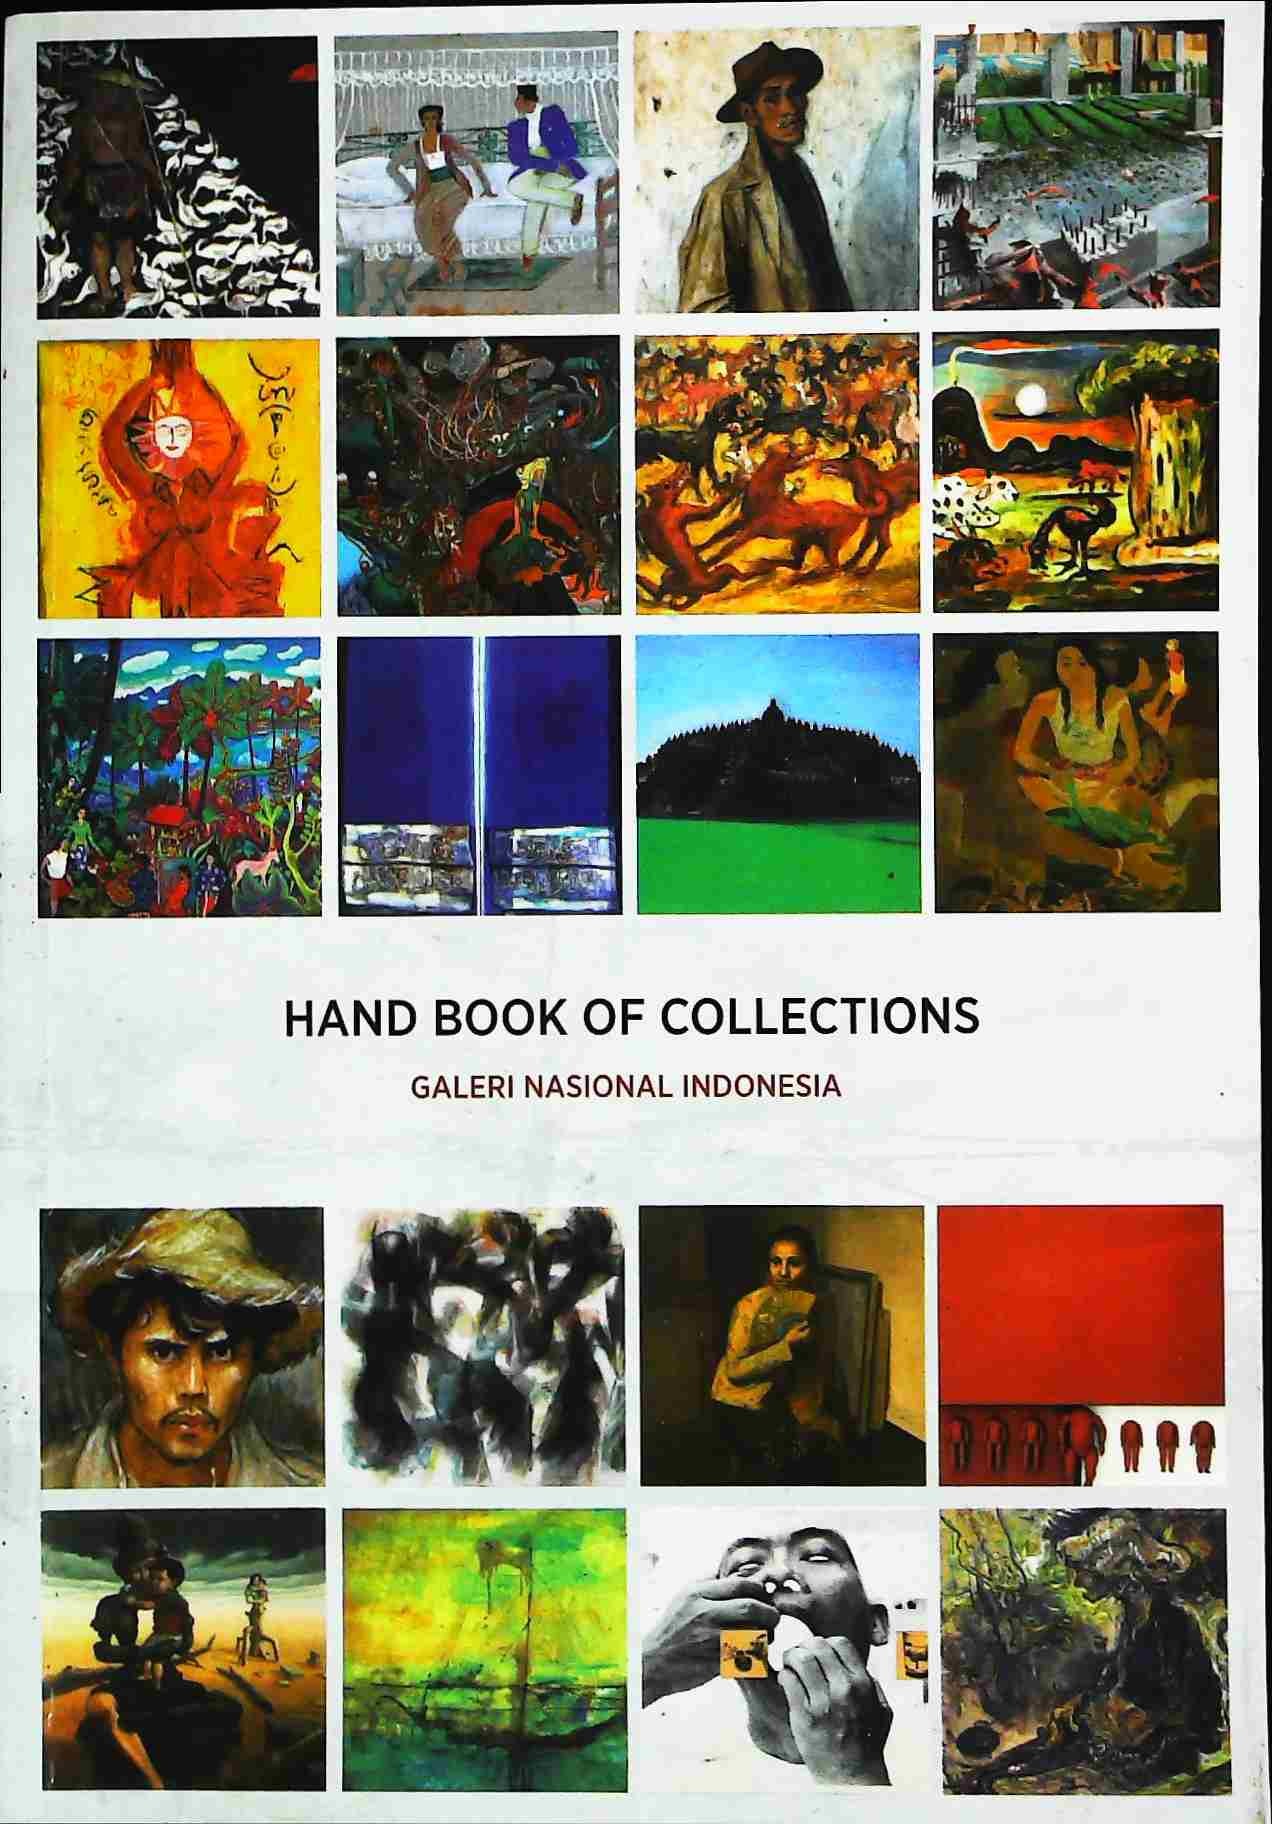 Hand Book of Collections Galeri Nasional Indonesia